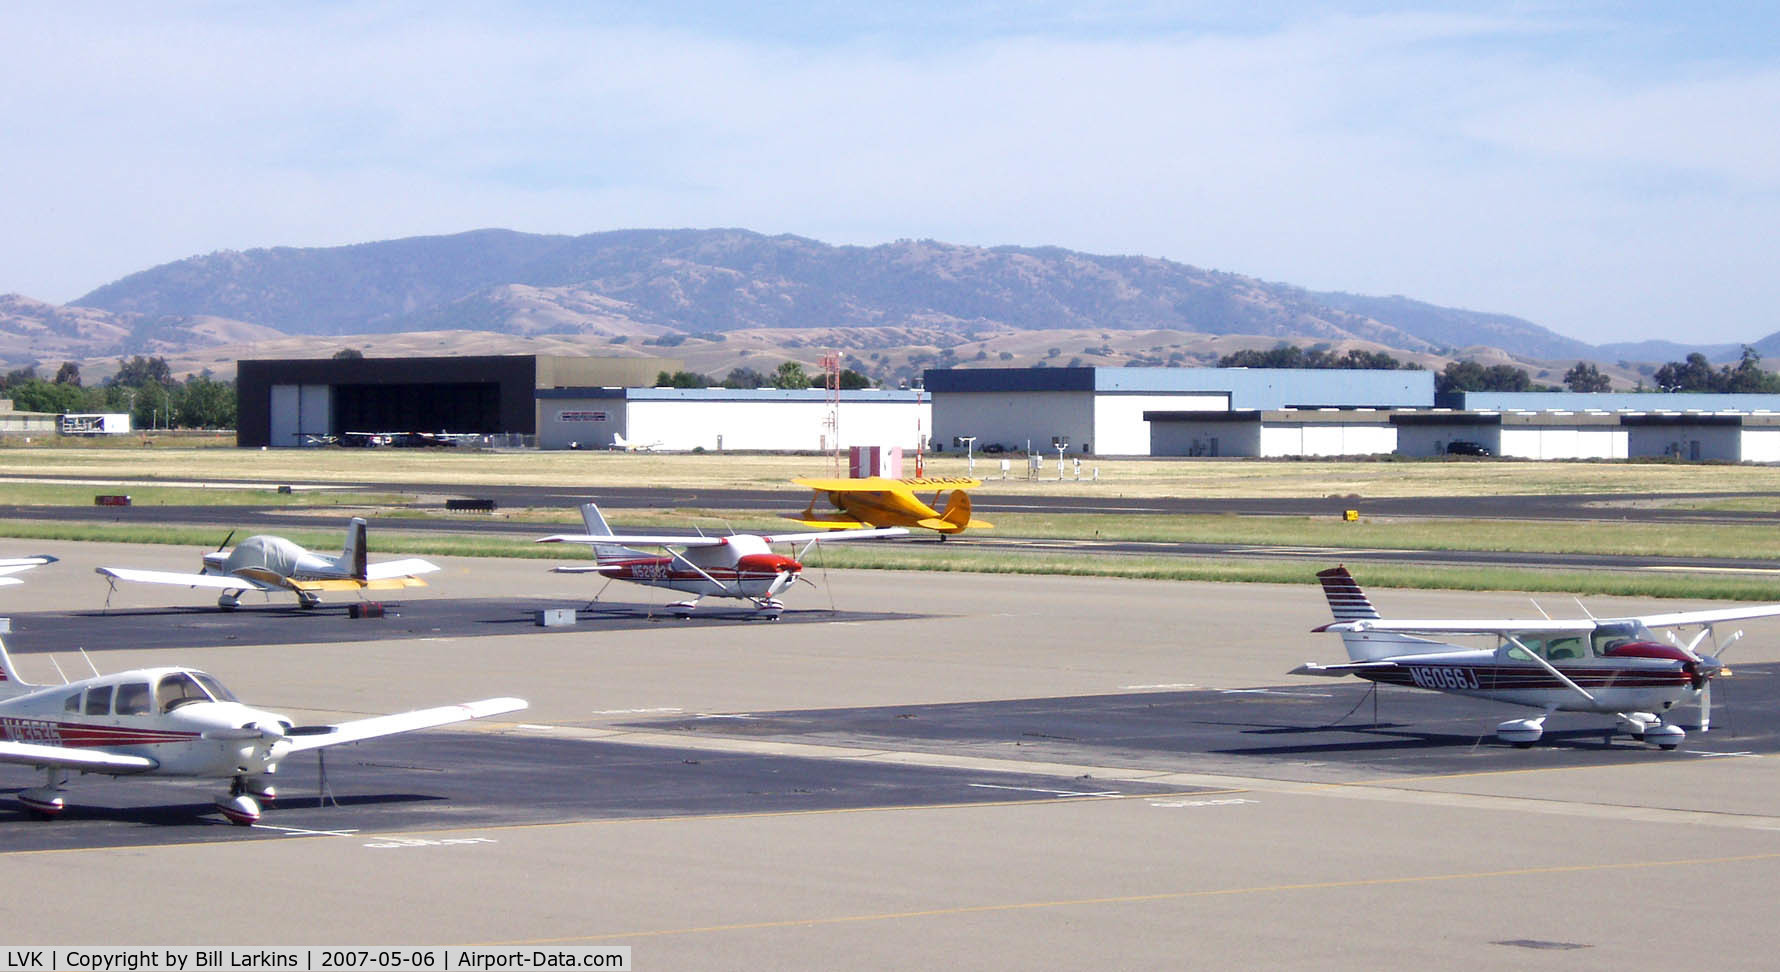 Livermore Municipal Airport (LVK) - Looking SE from N side of field.